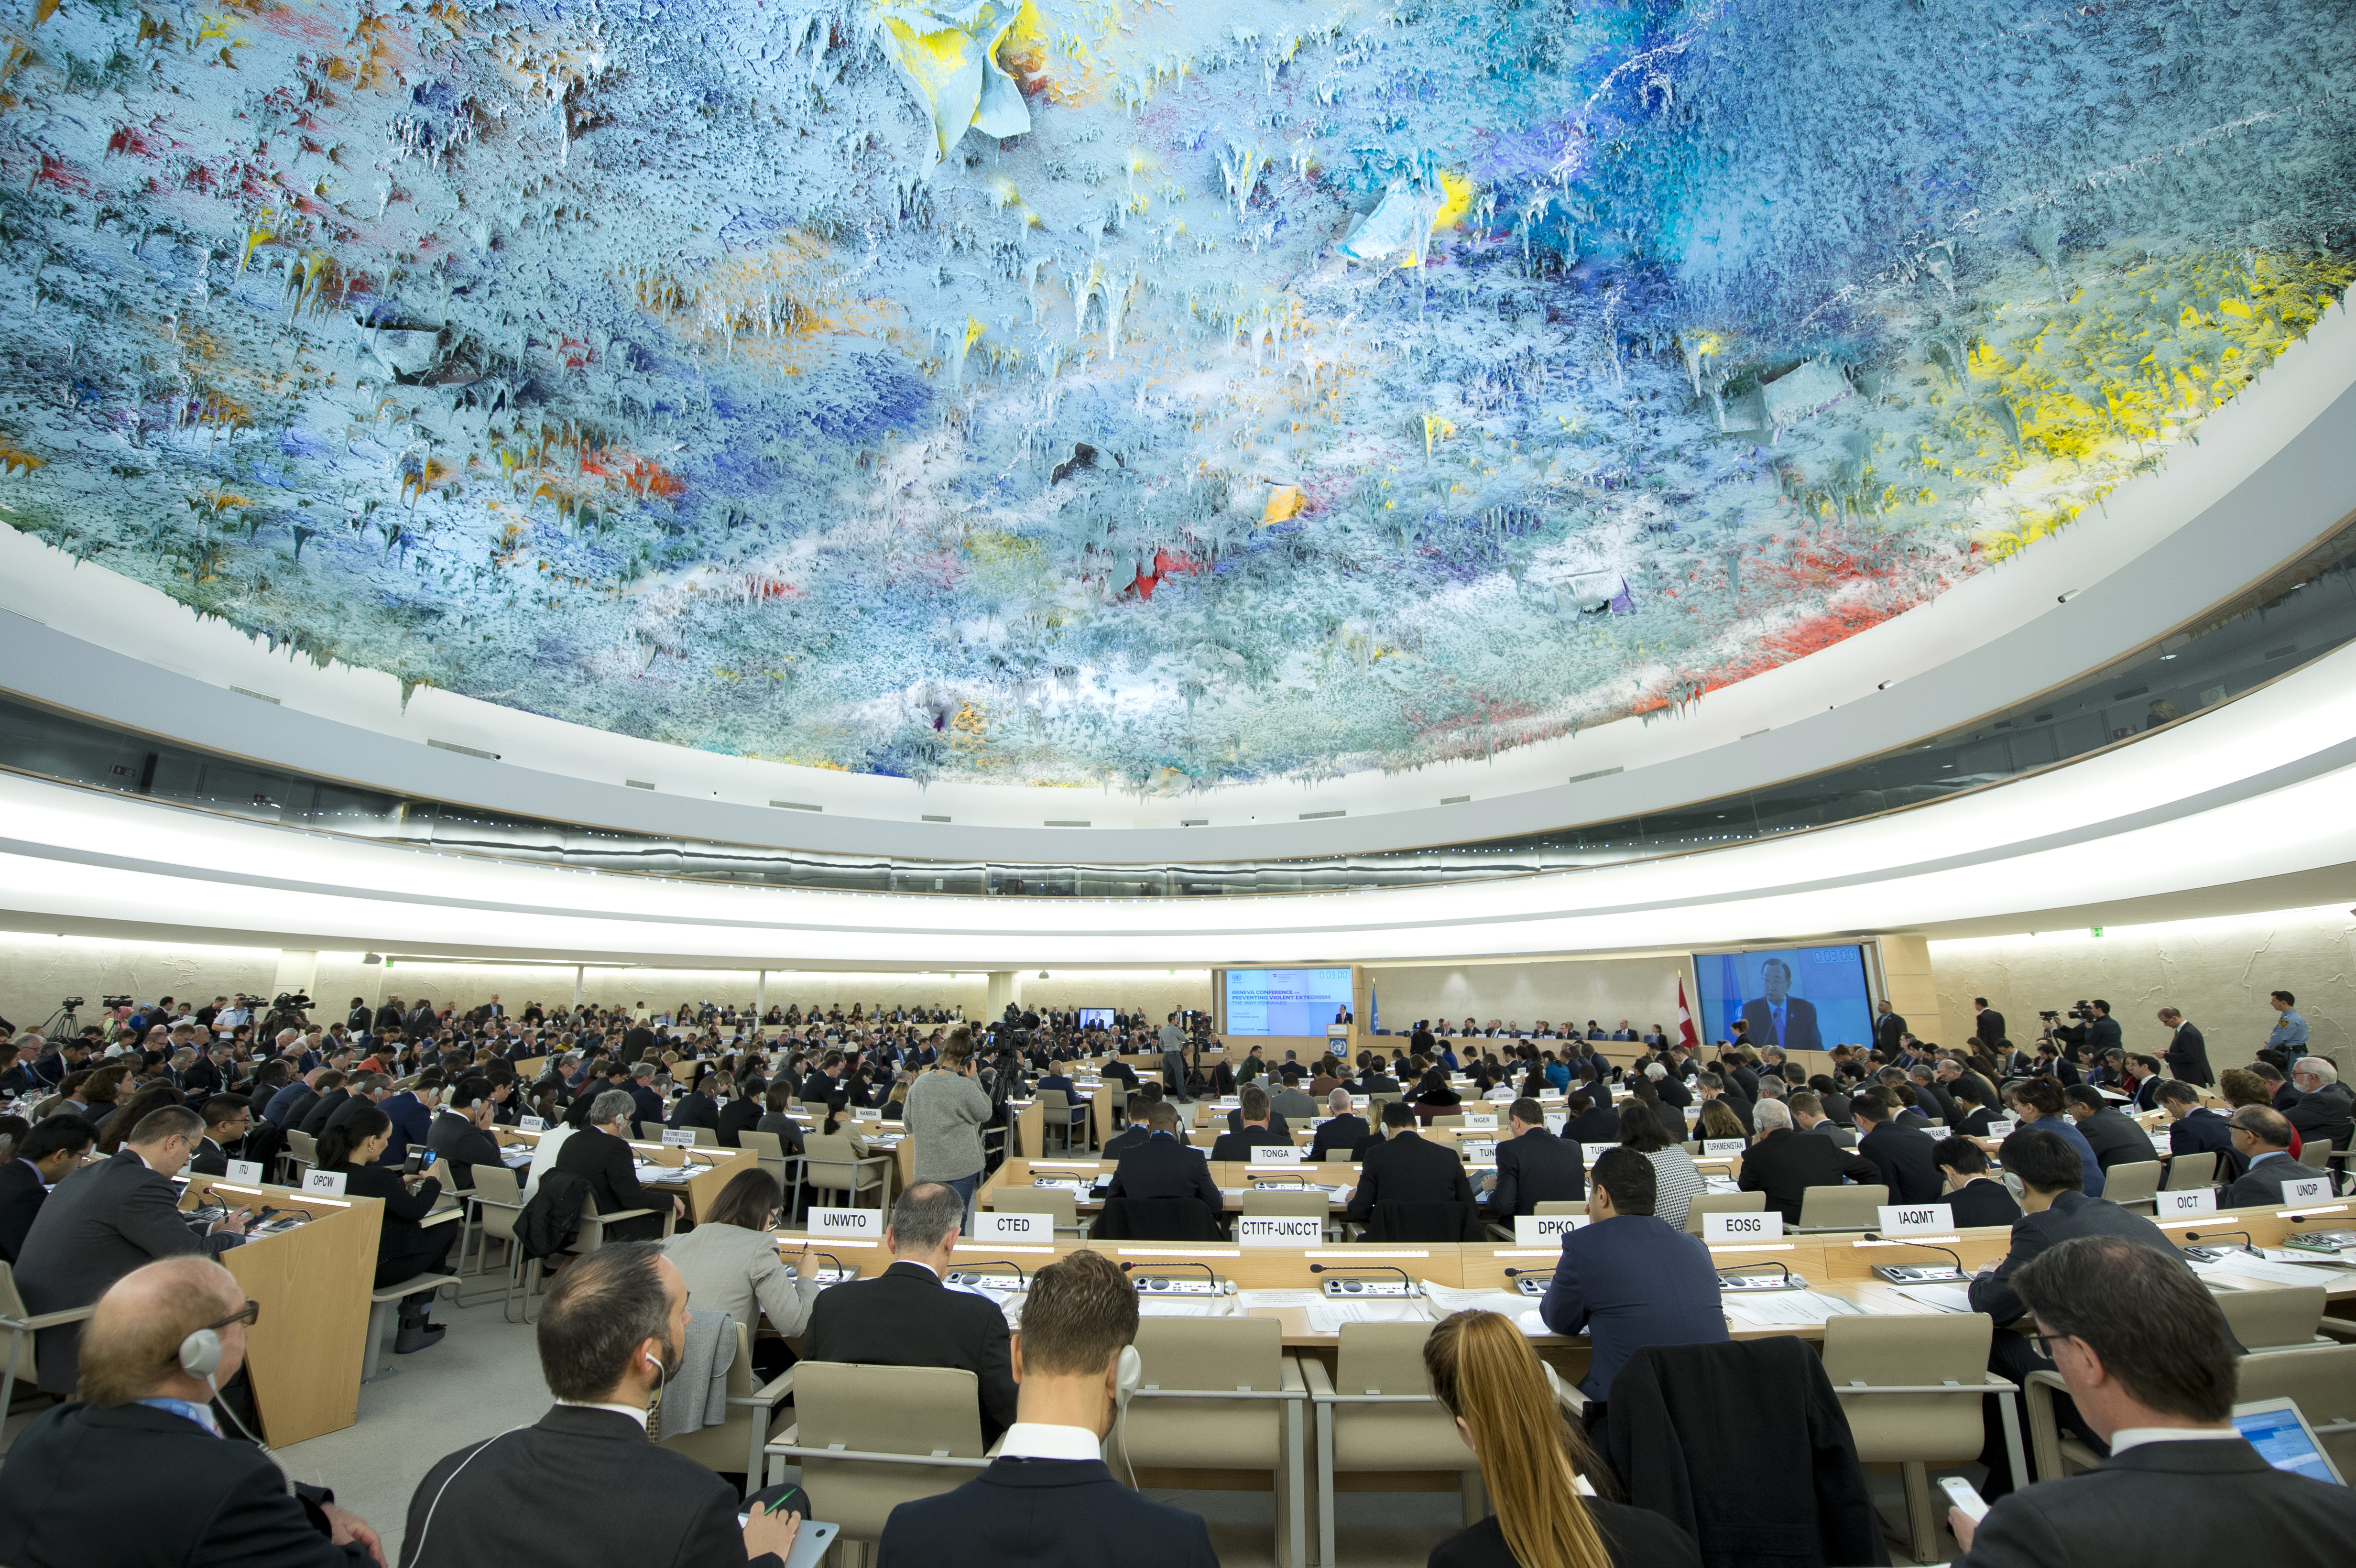 A wide view of the Human Rights and Alliance of Civilizations Room at the Palais des Nations